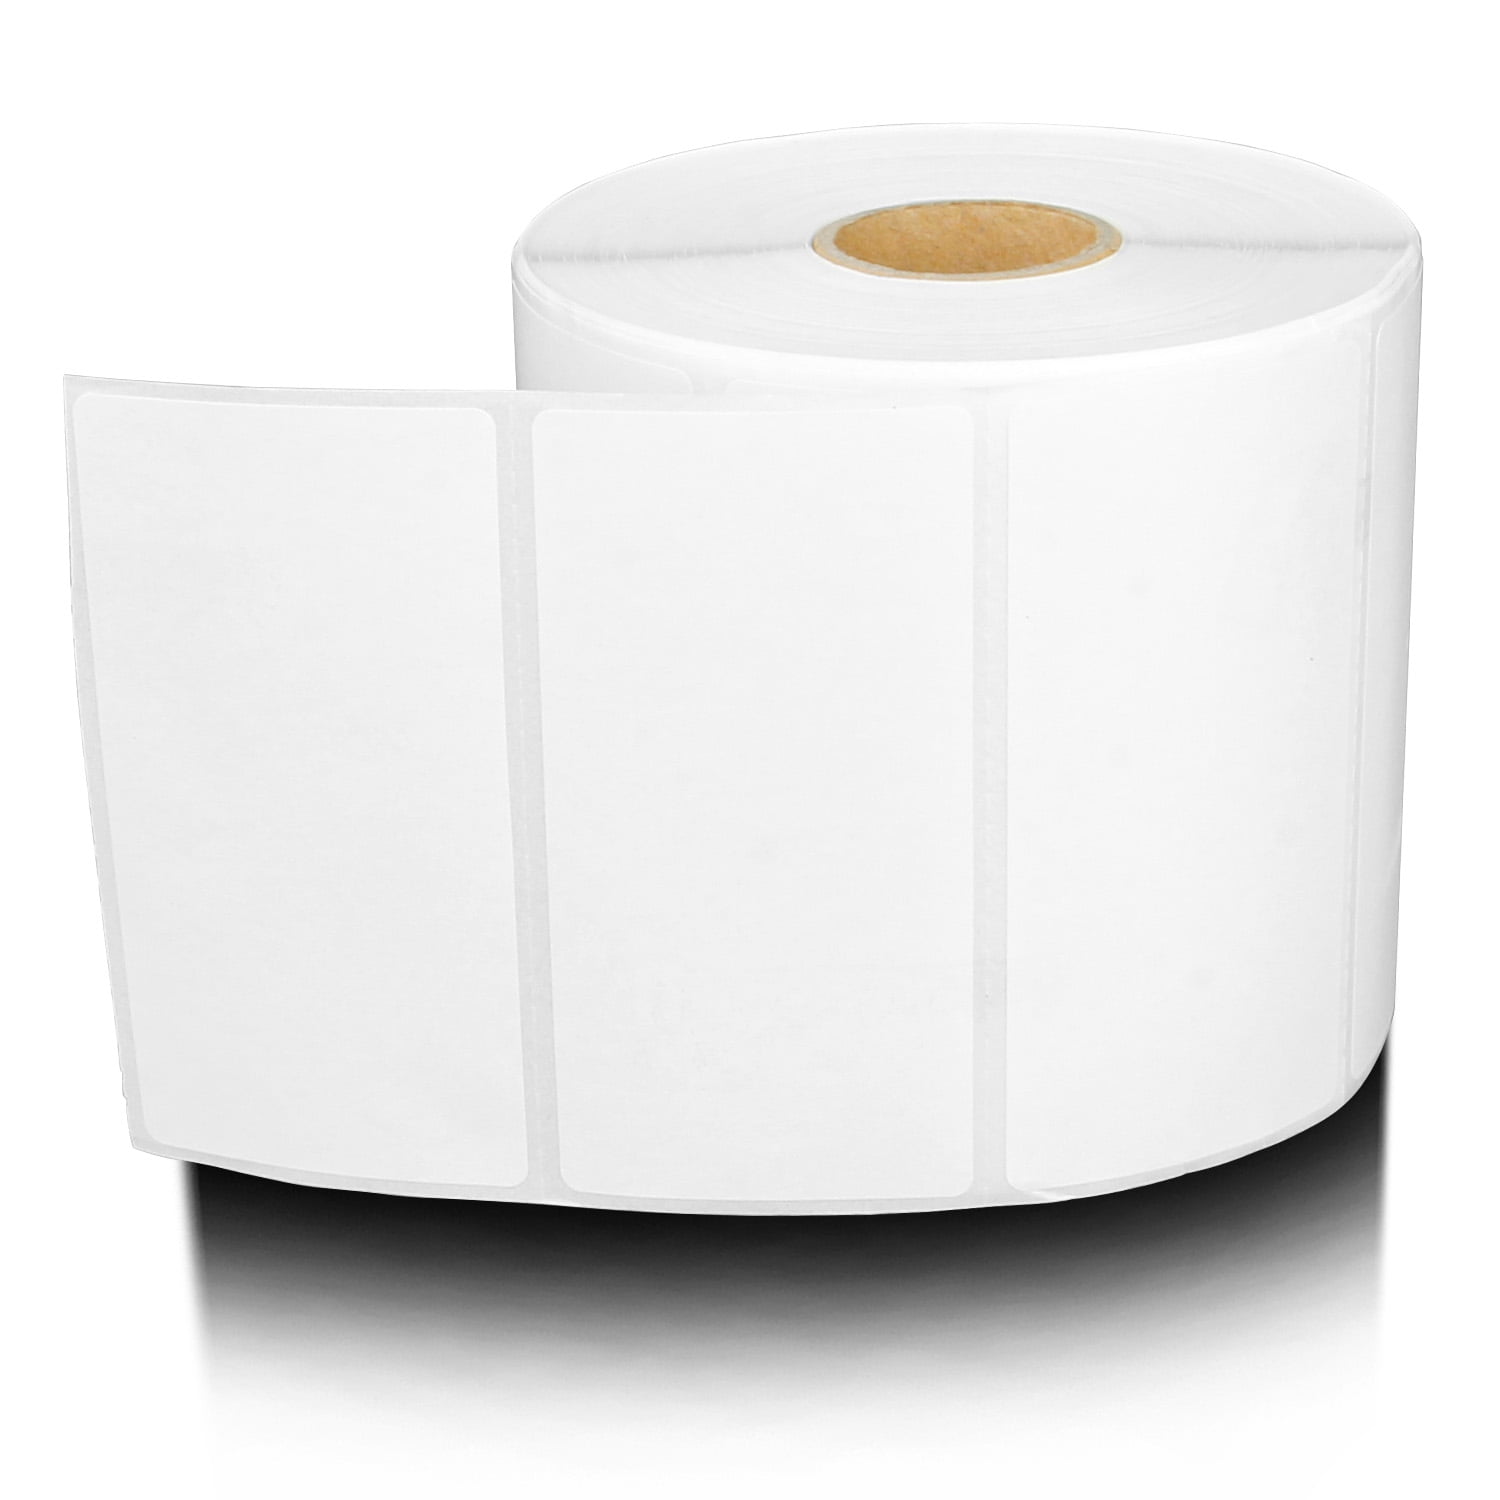 2.25x1.25 10 Rolls Direct Thermal Premium Top Coated  Labels for Zebra & Others 